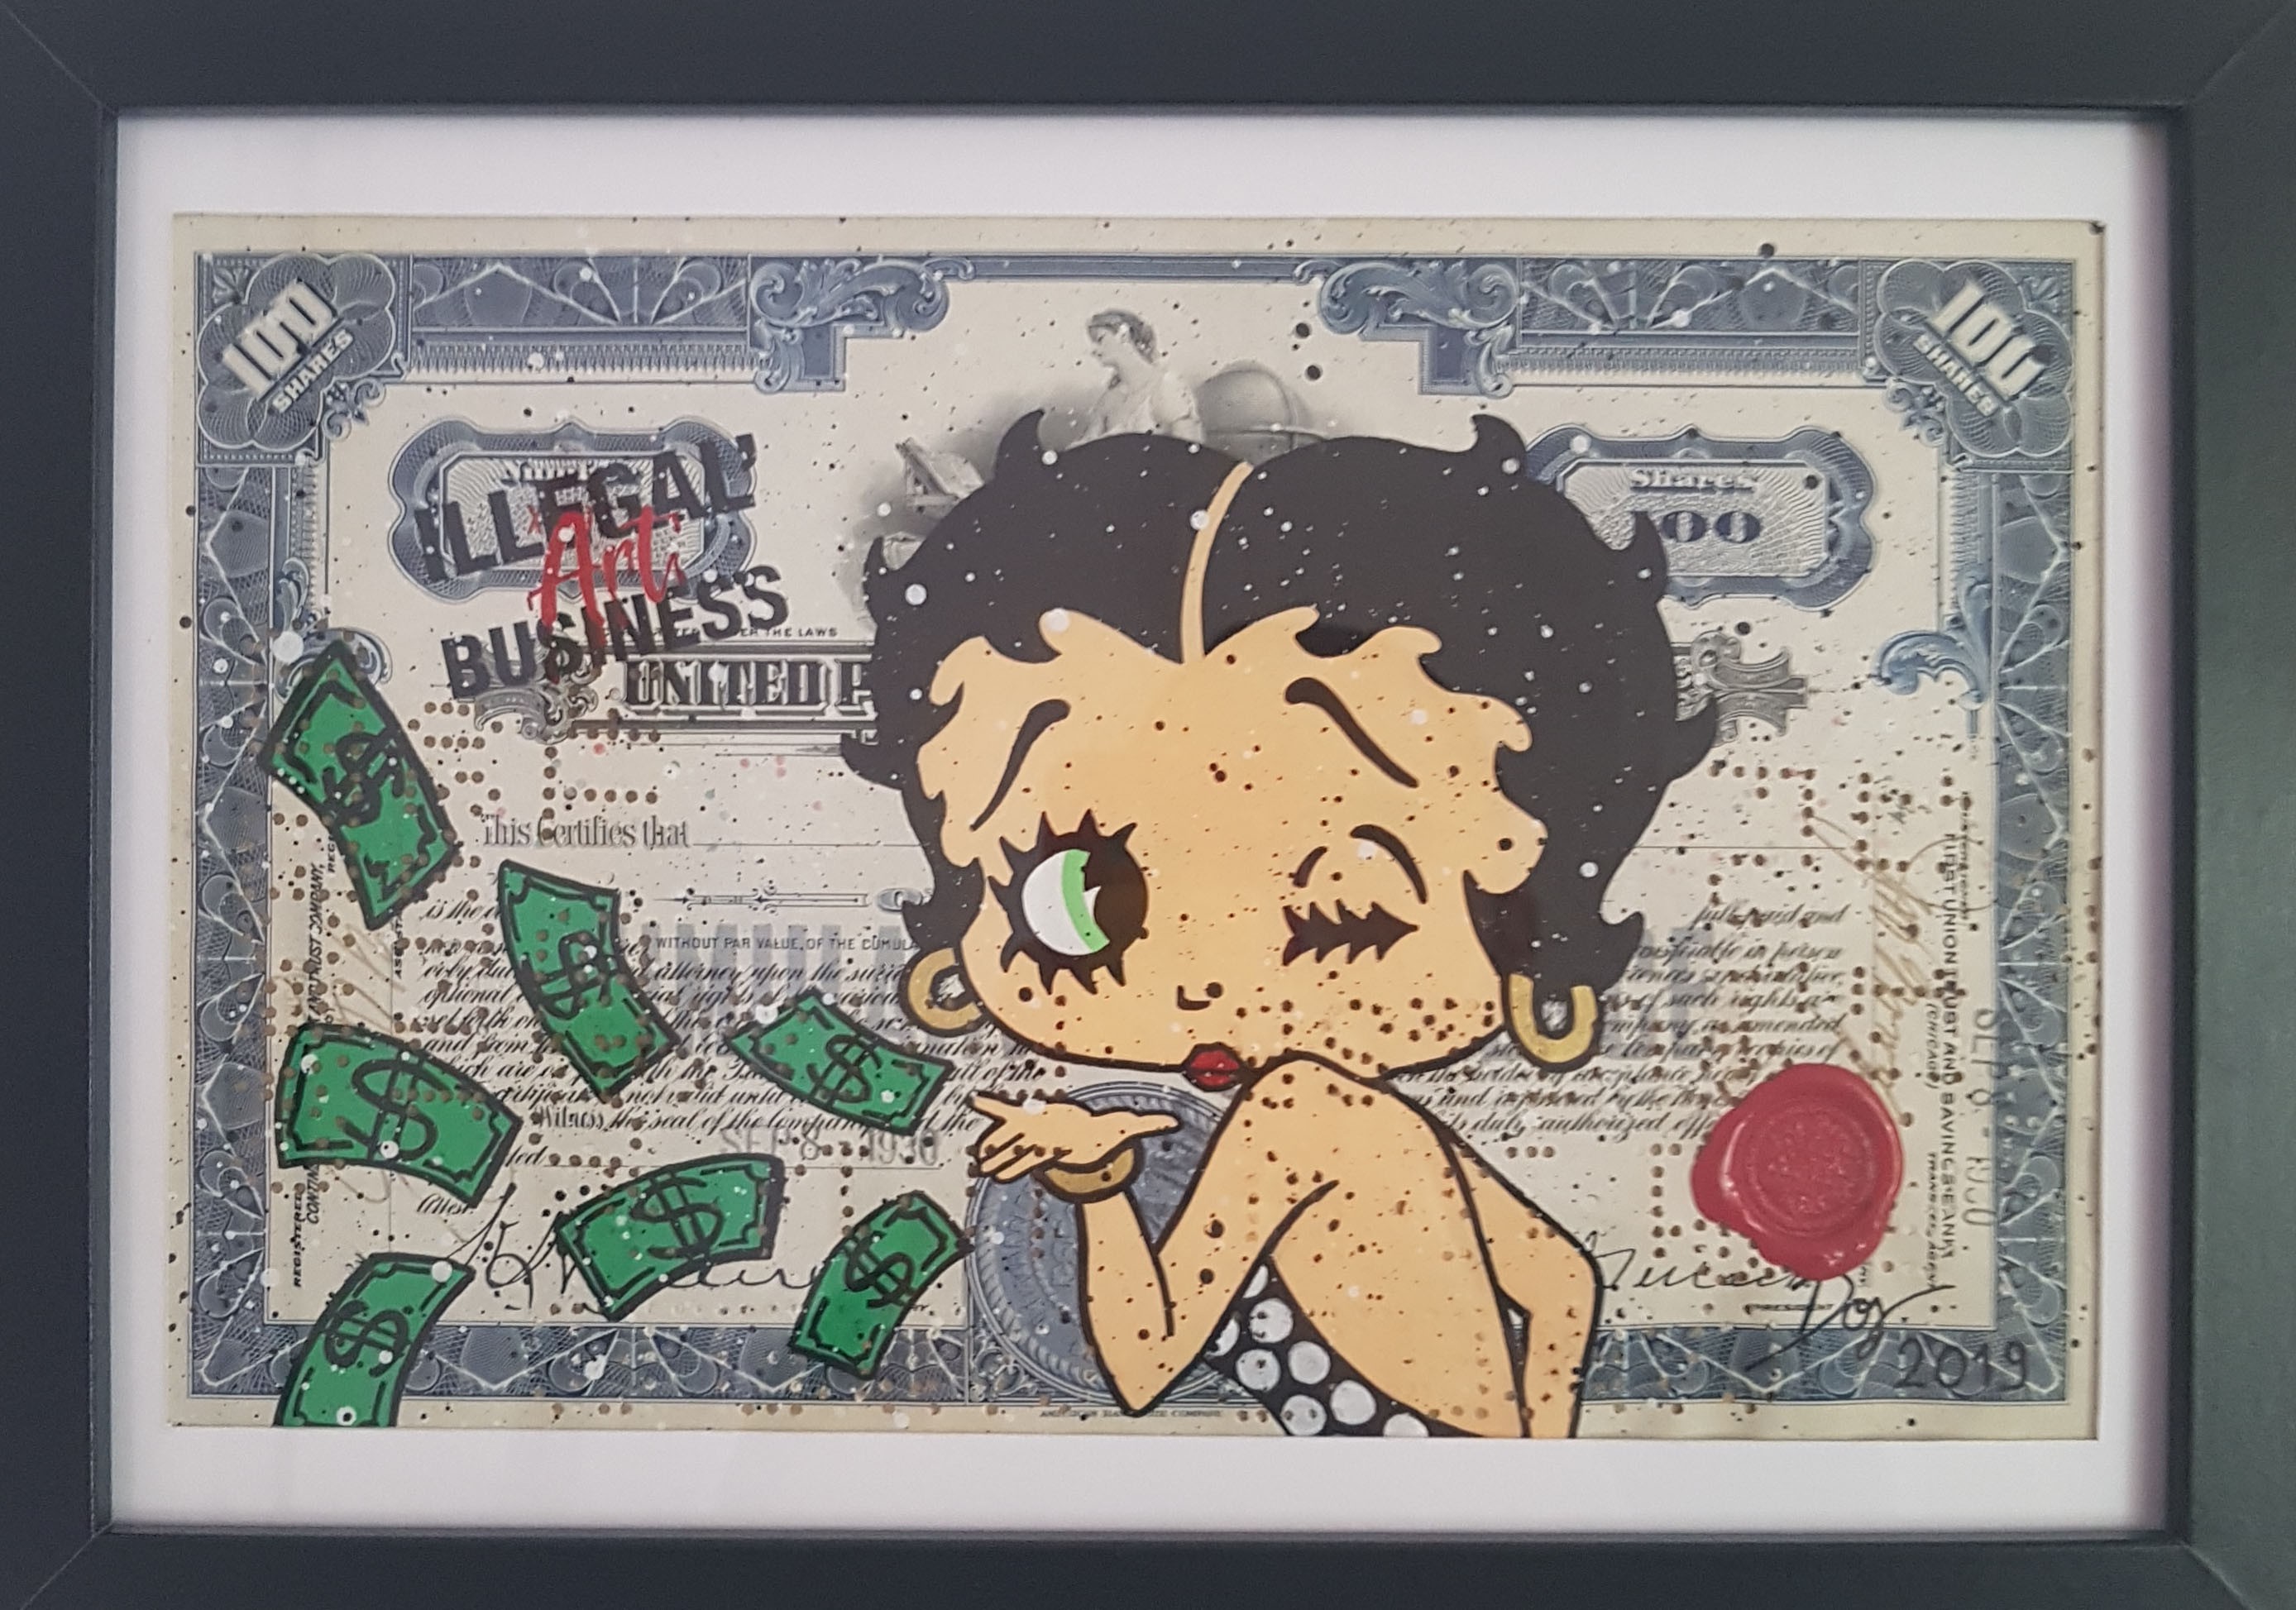 adi suhono recommends Betty Boop Images